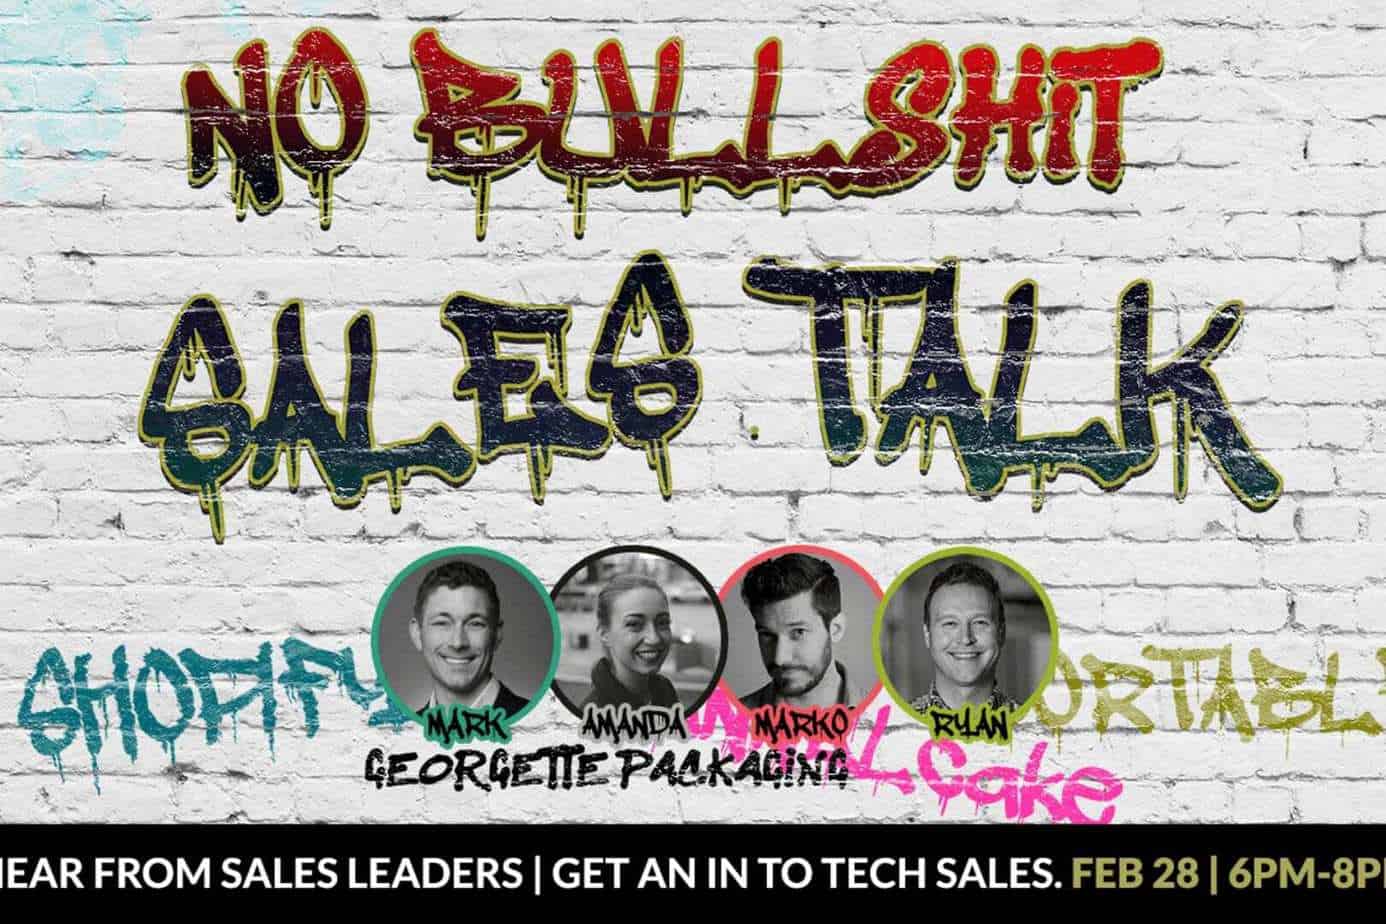 How to Make It in Tech Sales | No Bullshit Sales Talk With FunnelCake, Shopify Plus, Georgette Packaging